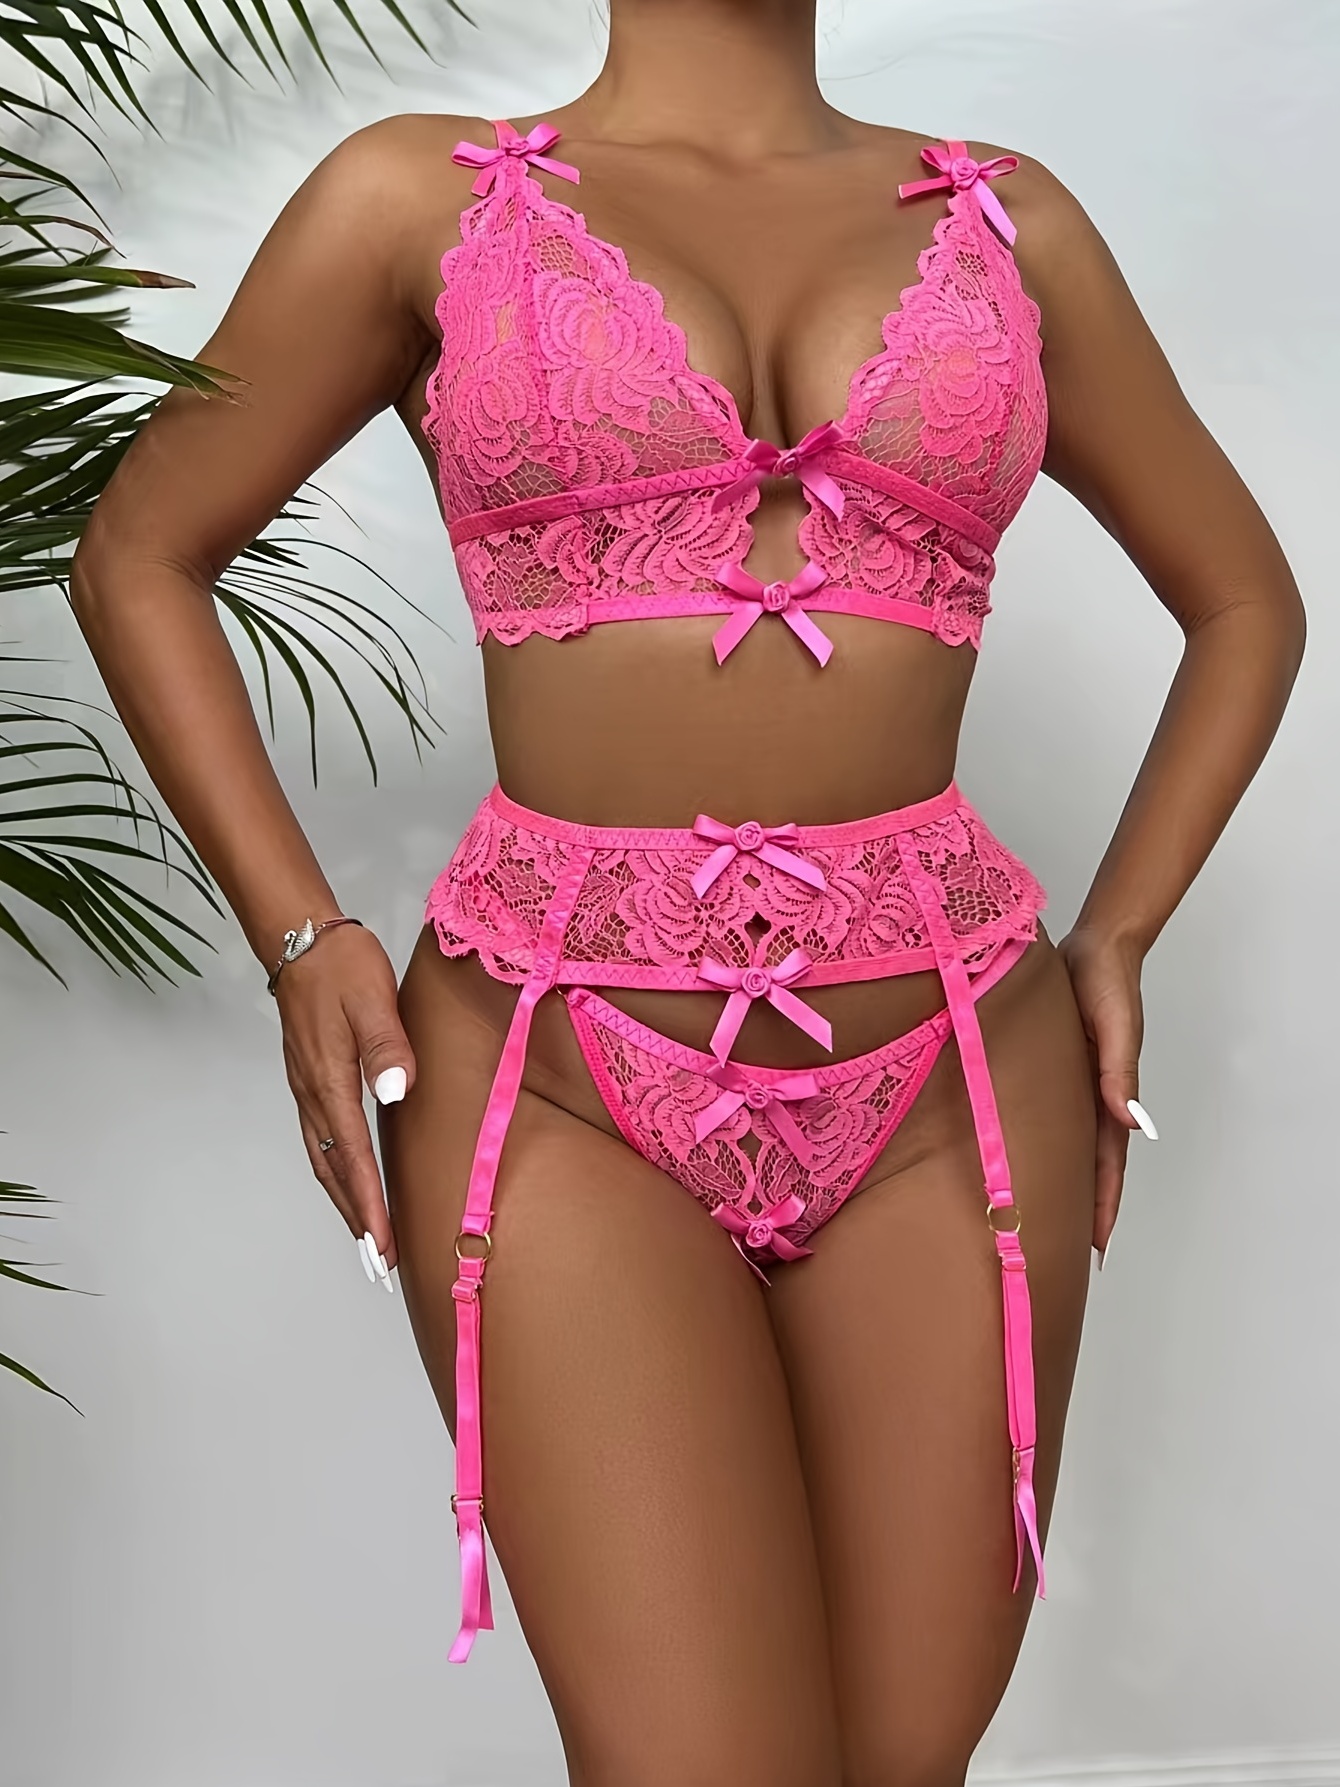 3 Pcs Seductive Floral Lace Lingerie Set With Hollow Out Bra, Garter Belt,  And G-String - Perfect For Women's Intimate Wear